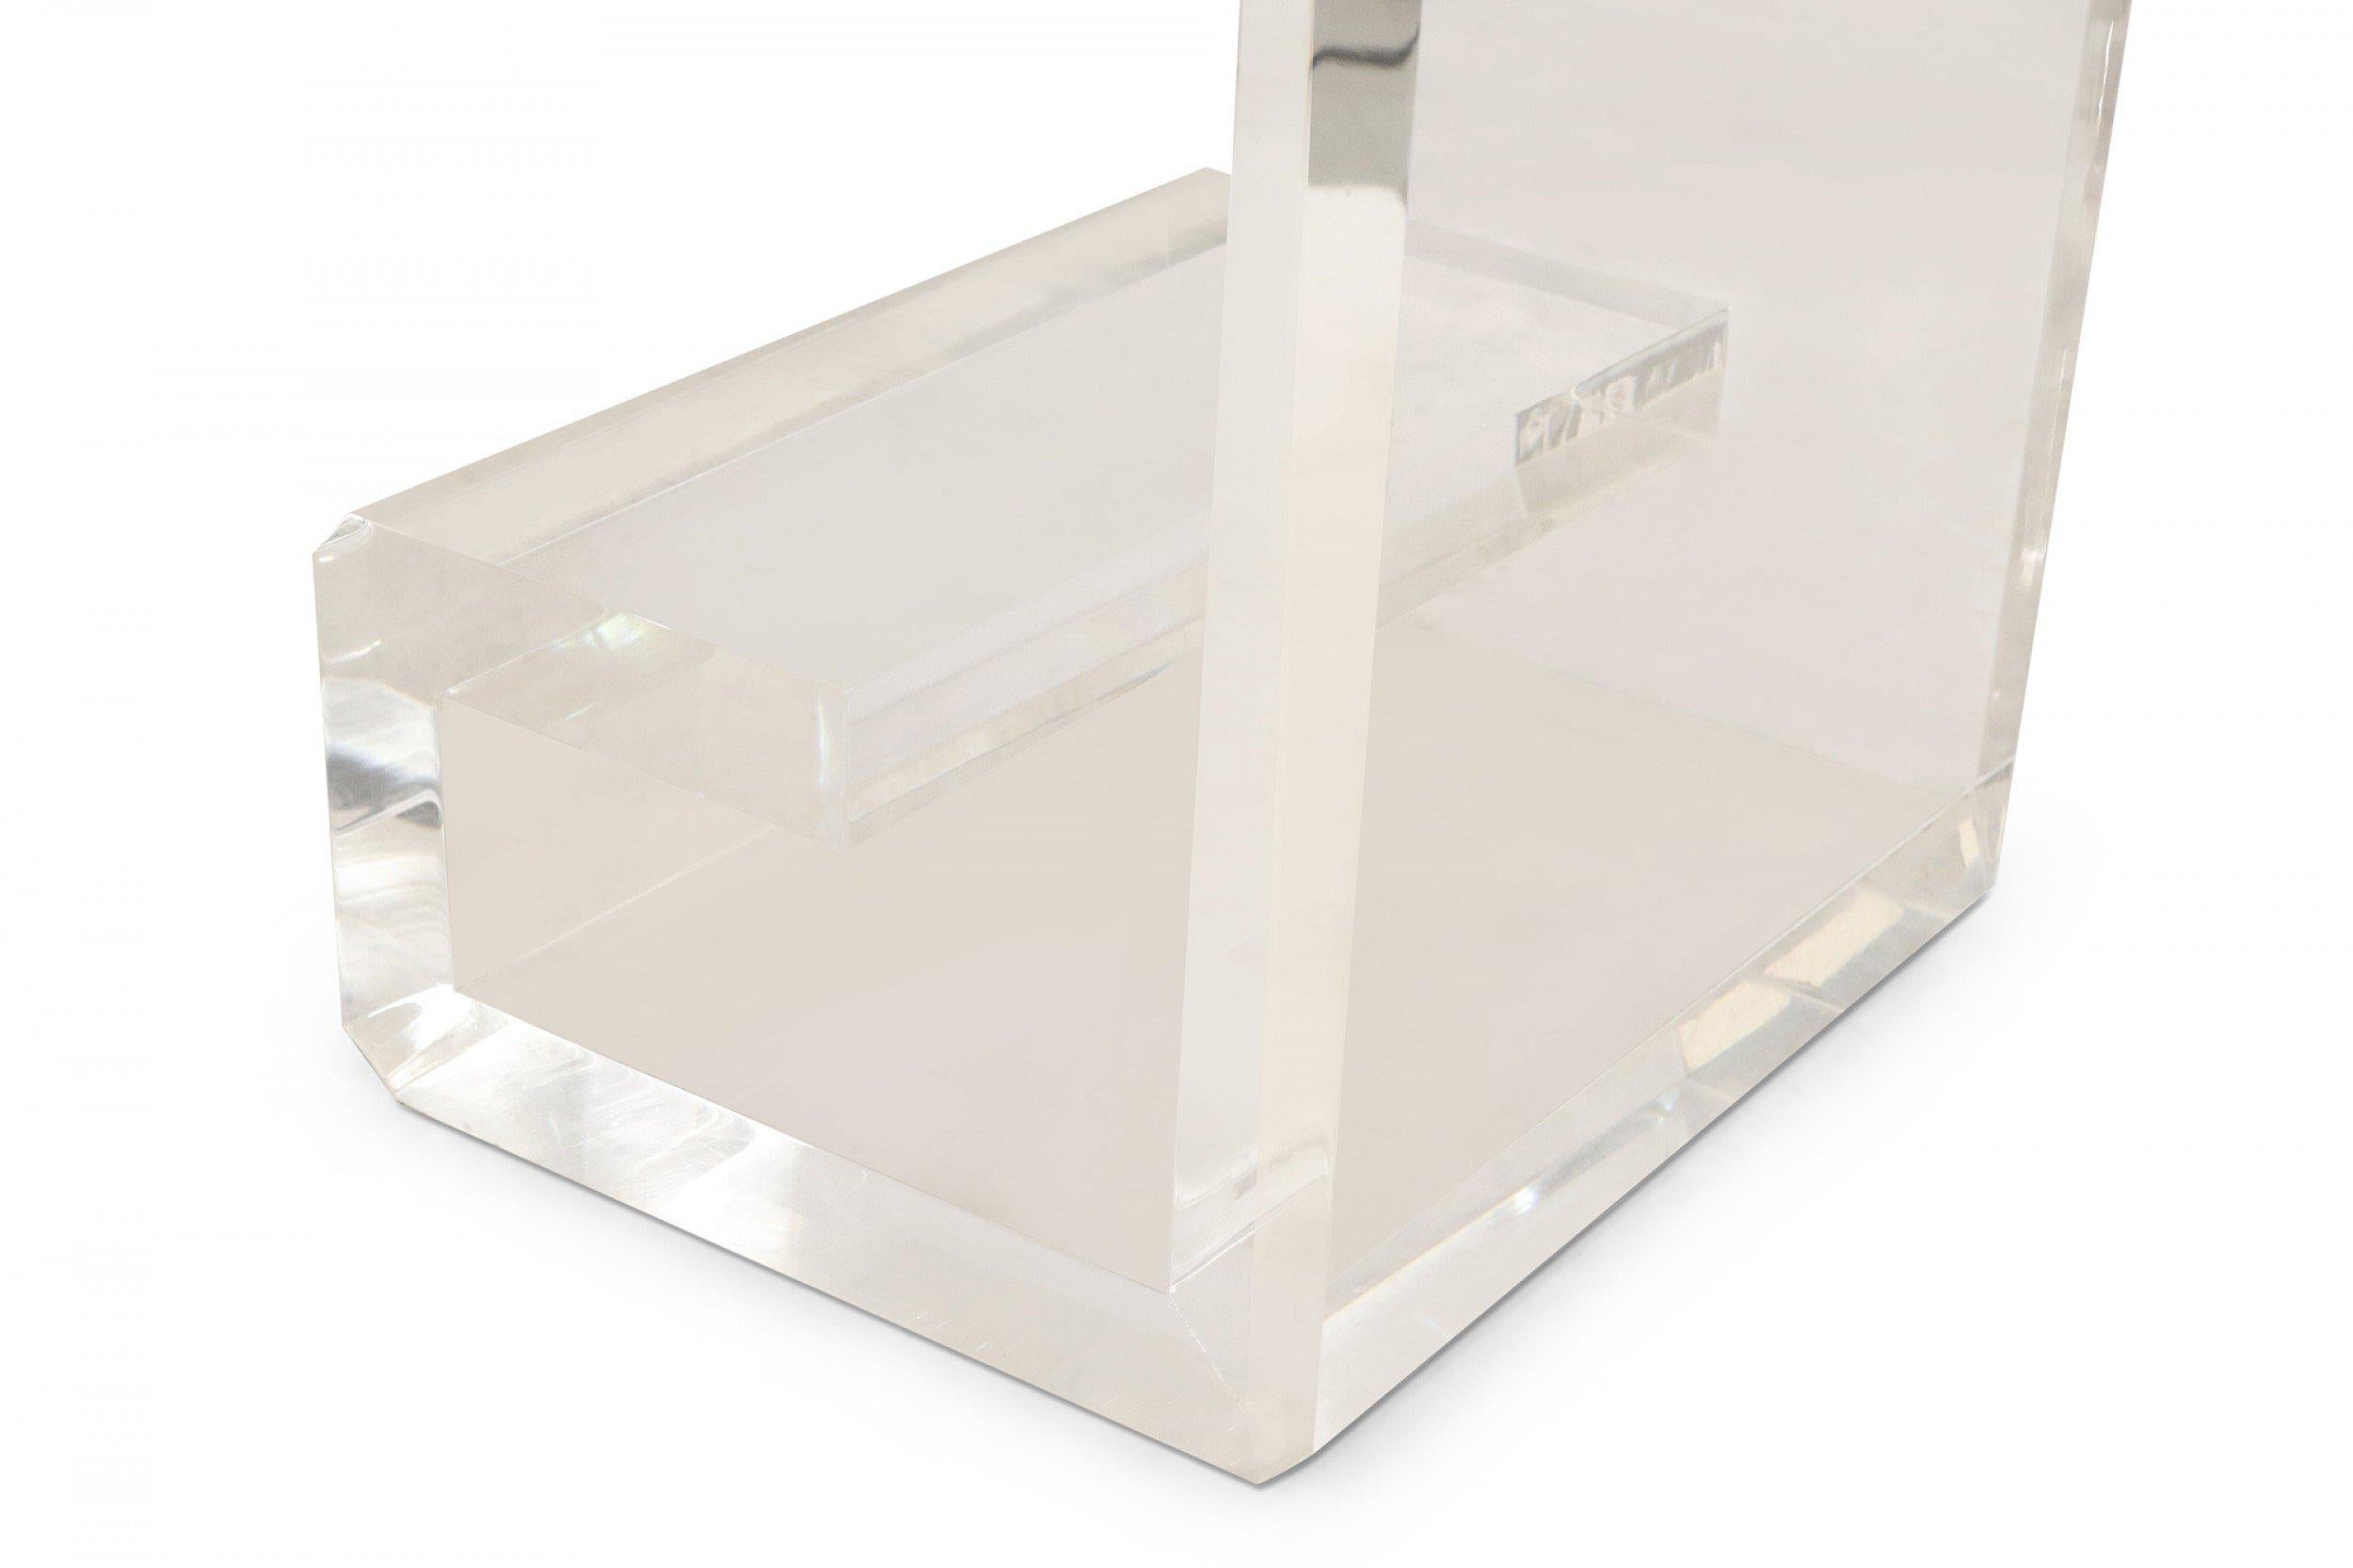 Contemporary lucite desk with 3 inset antiqued mirror squares on the top surface, a shallow glass compartment/shelf, and geometric scroll-shaped legs. (designed by Geoffrey Bradfield).
 